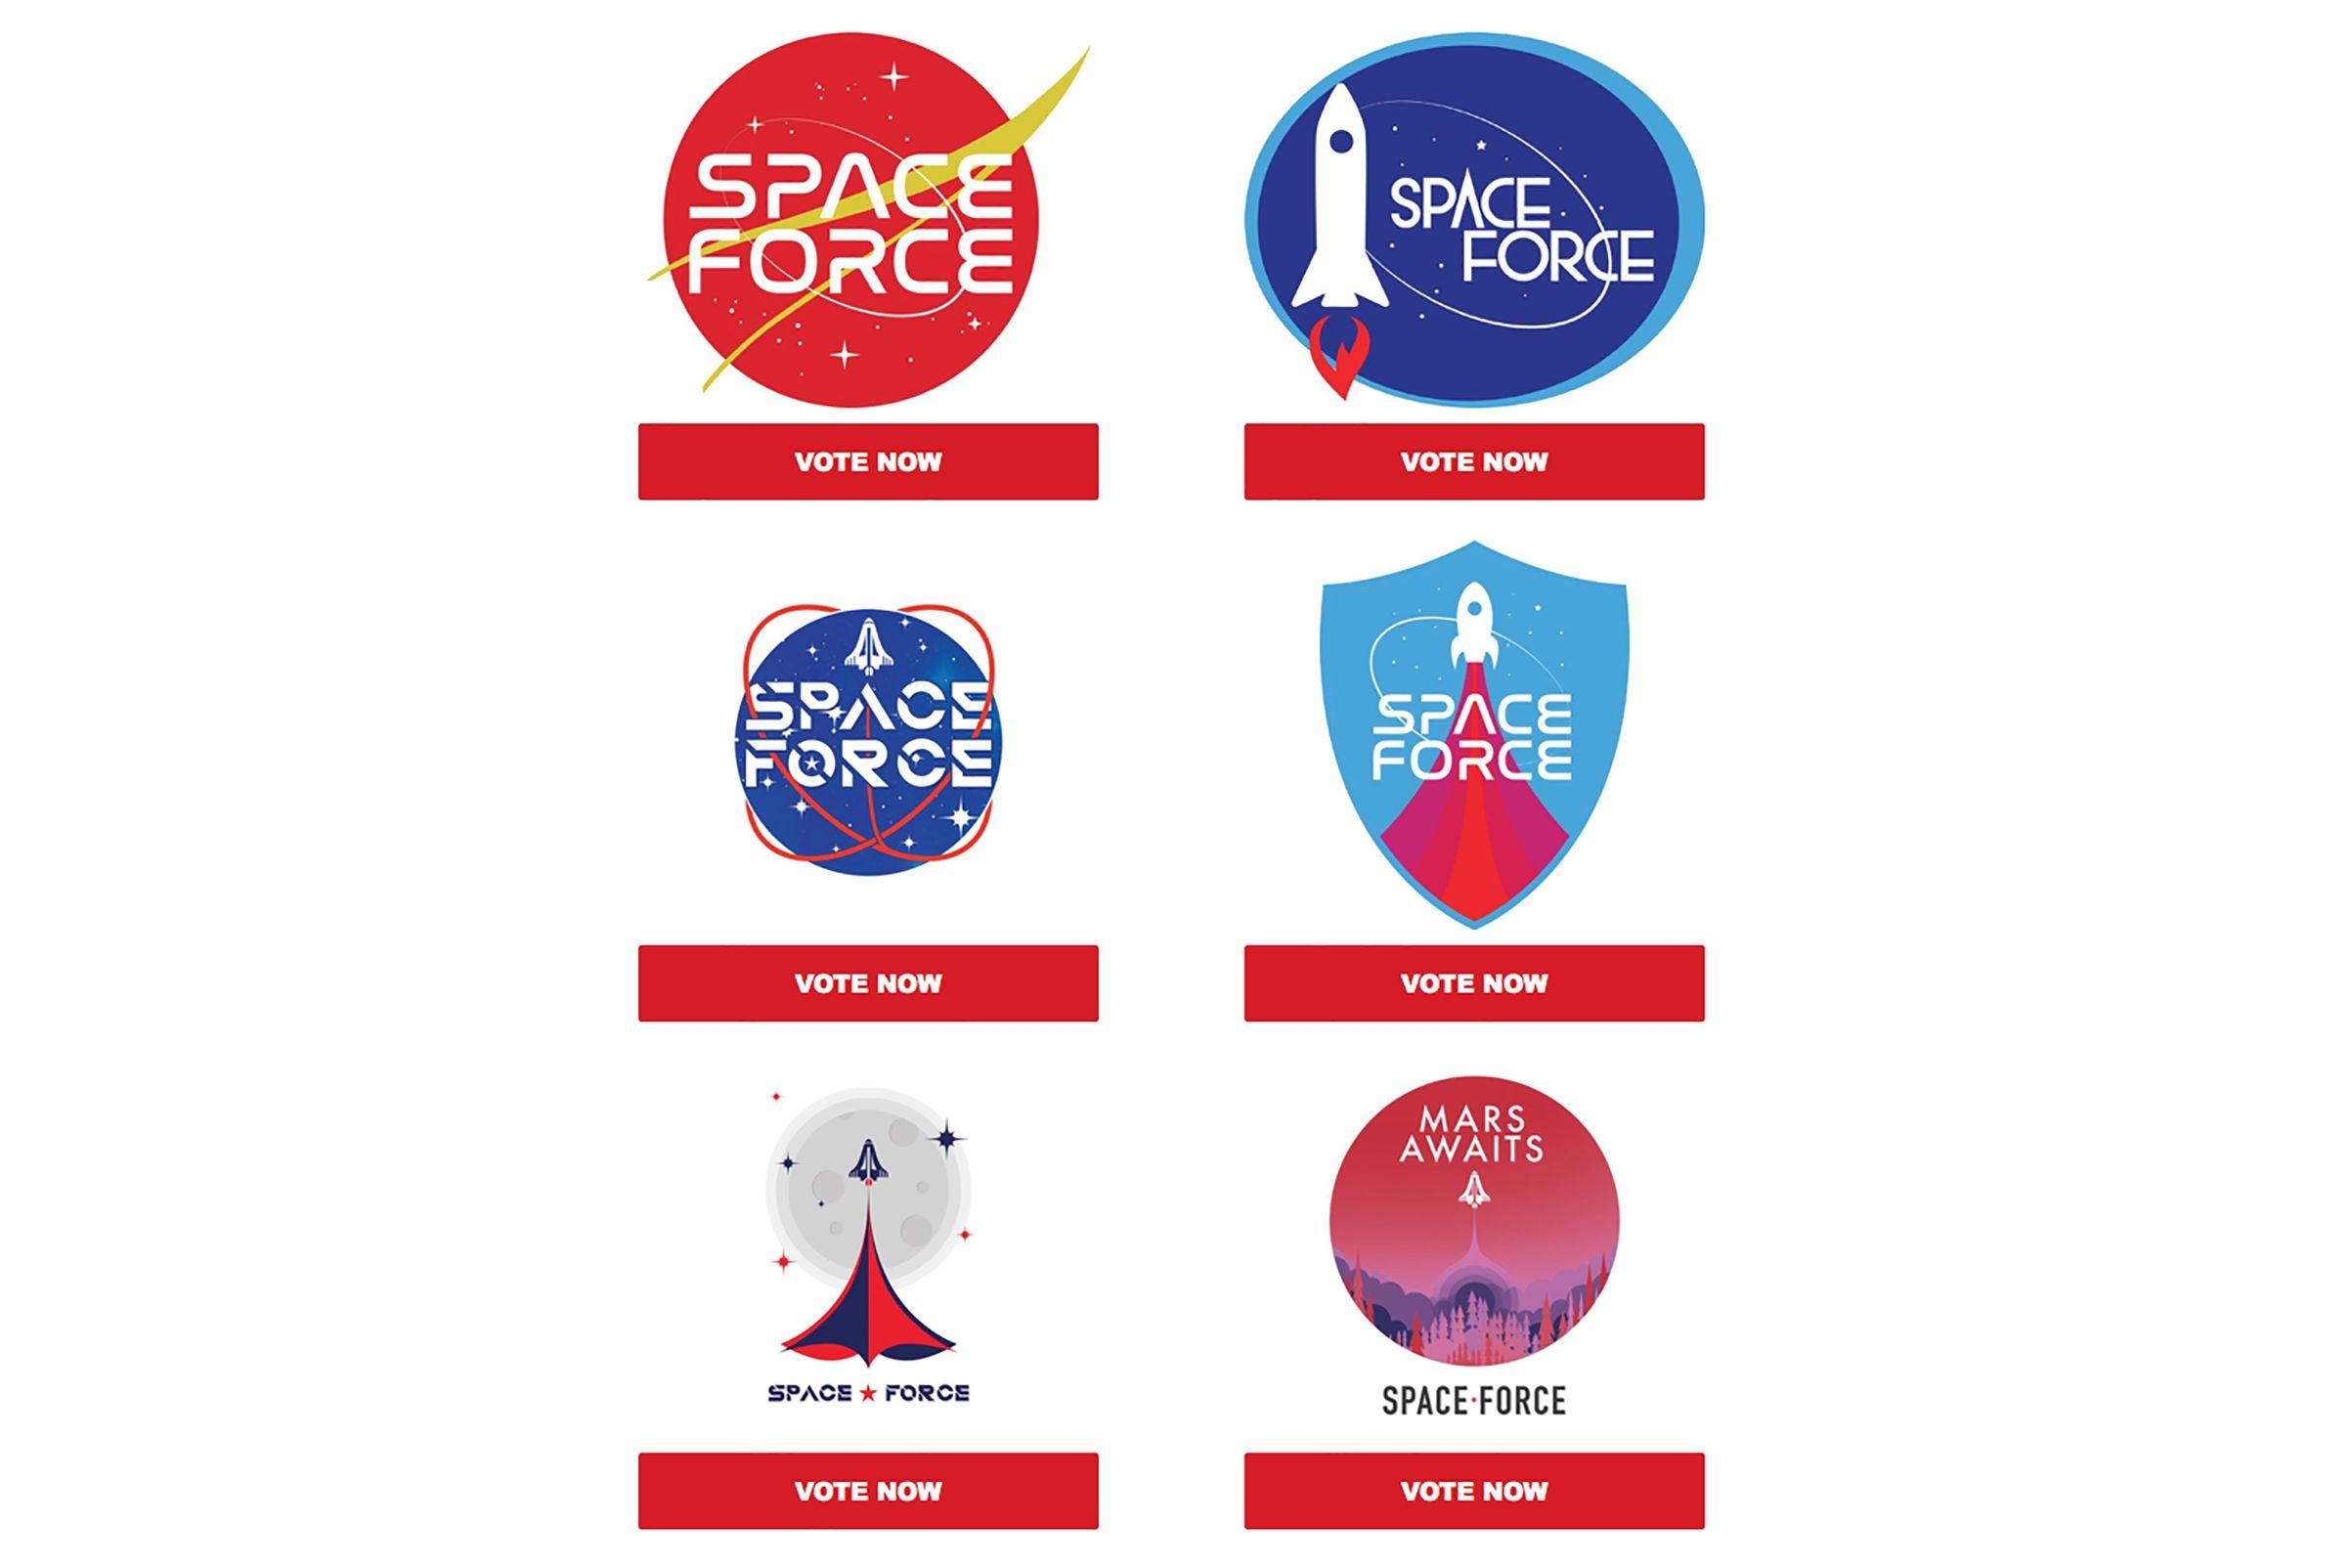 Space Force Logo - Trump Campaign Asks Supporters to Vote for Space Force Logo | Time